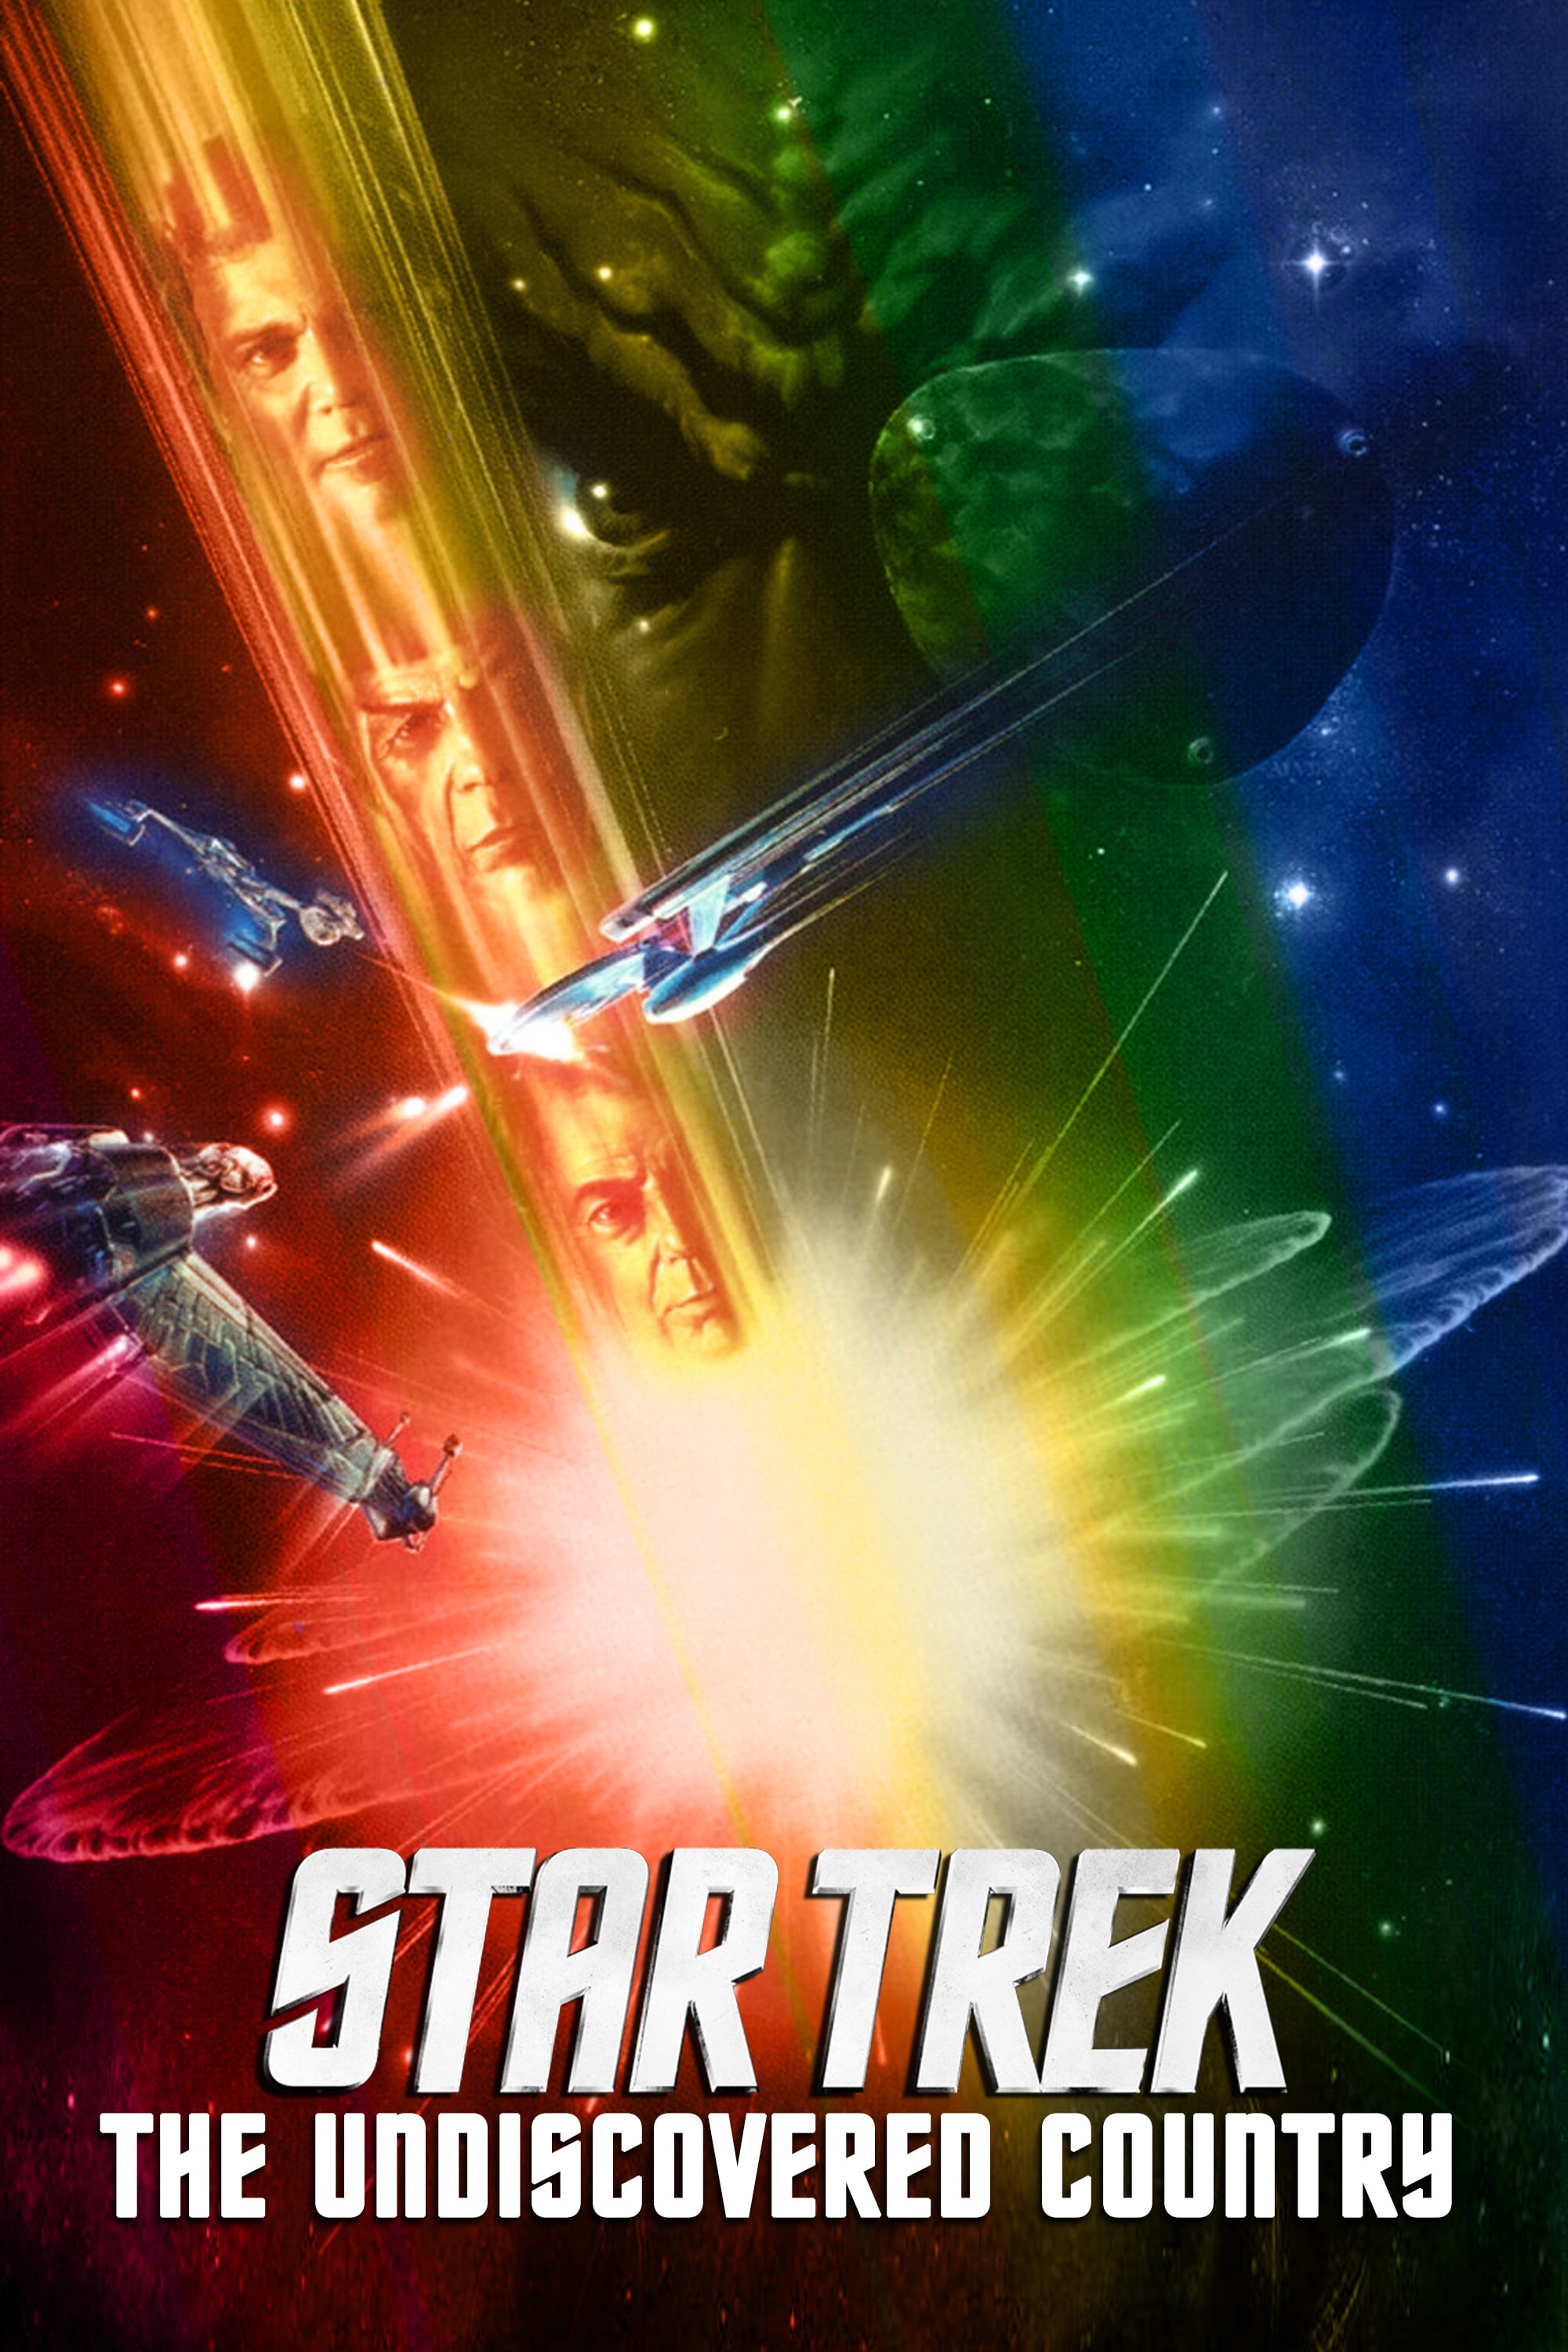 watch star trek vi the undiscovered country online free